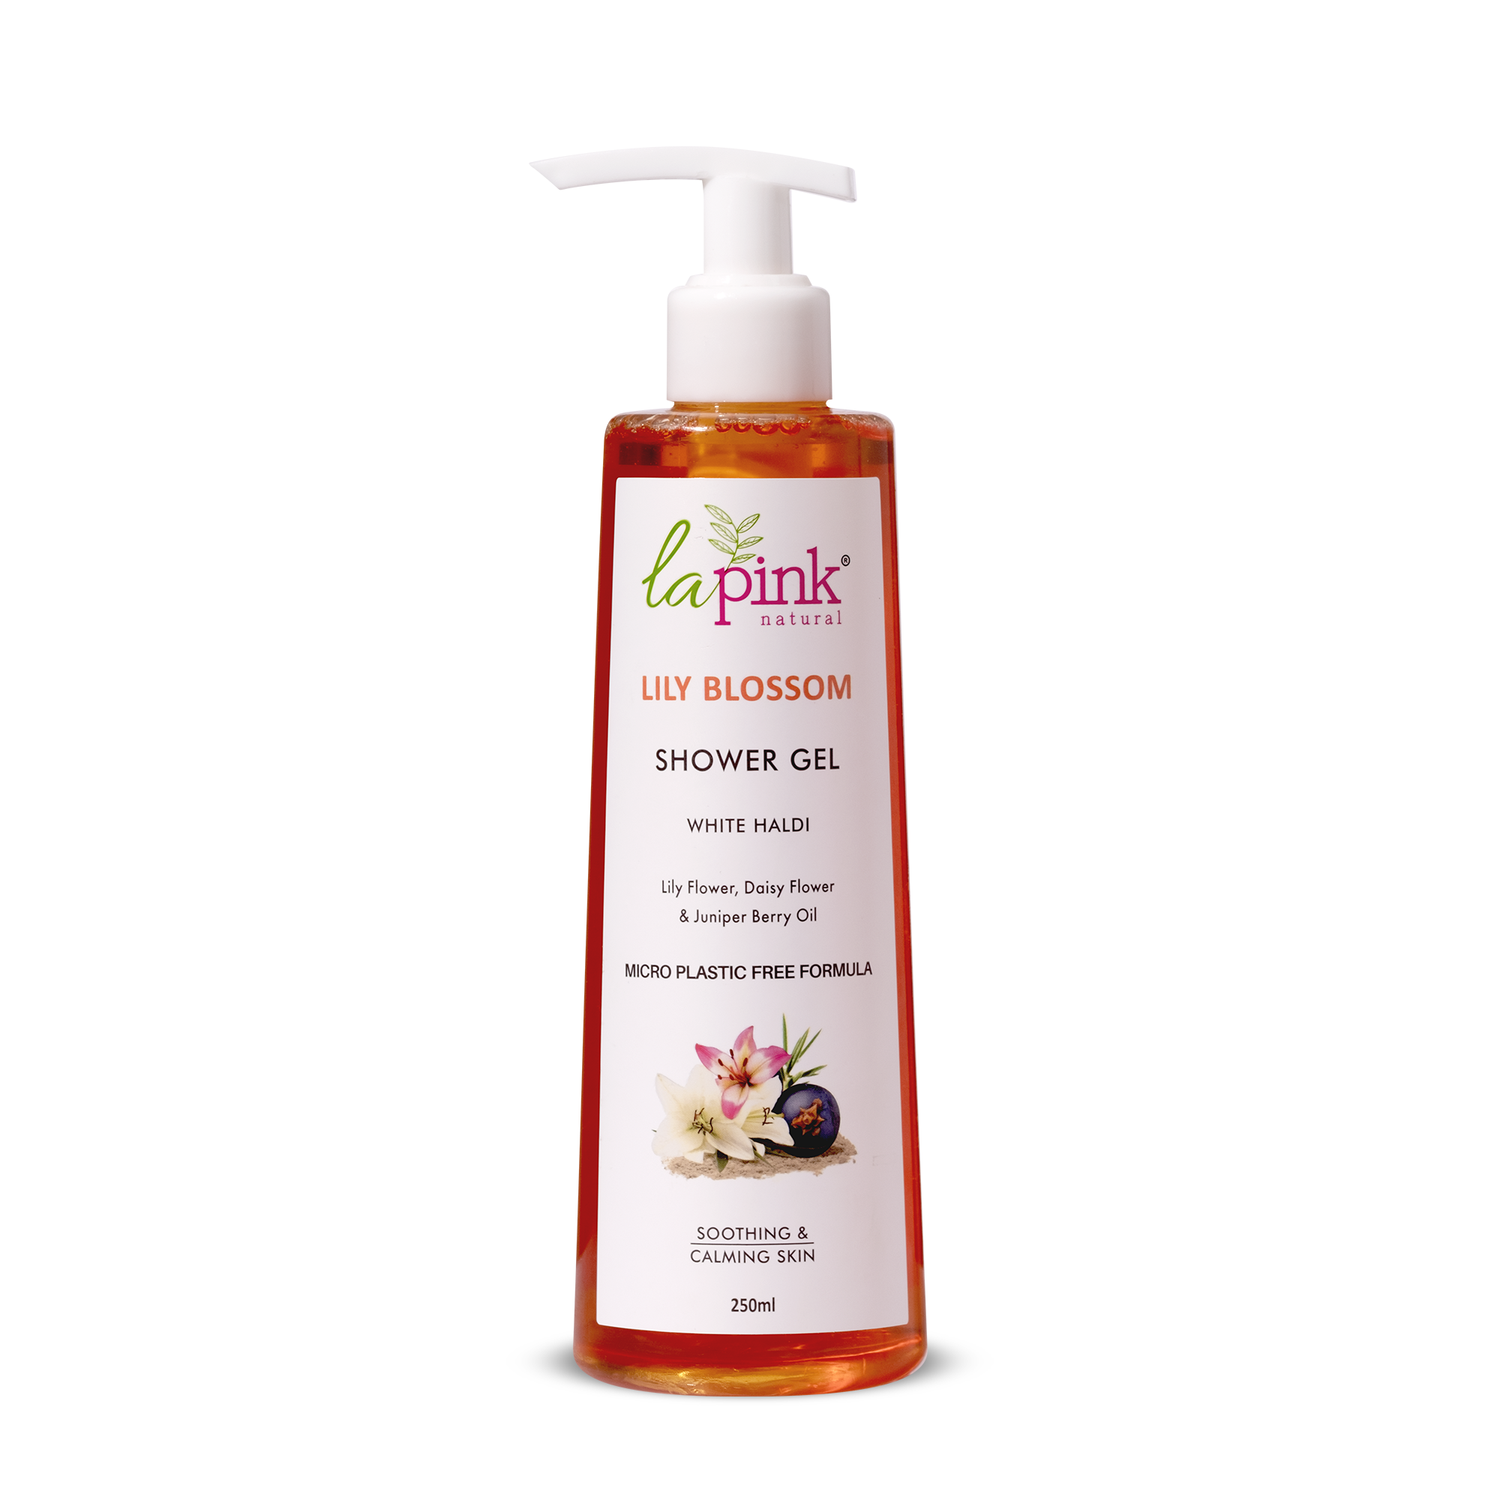 Lily Blossom Shower Gel with White Haldi for Soothing and Calming Skin